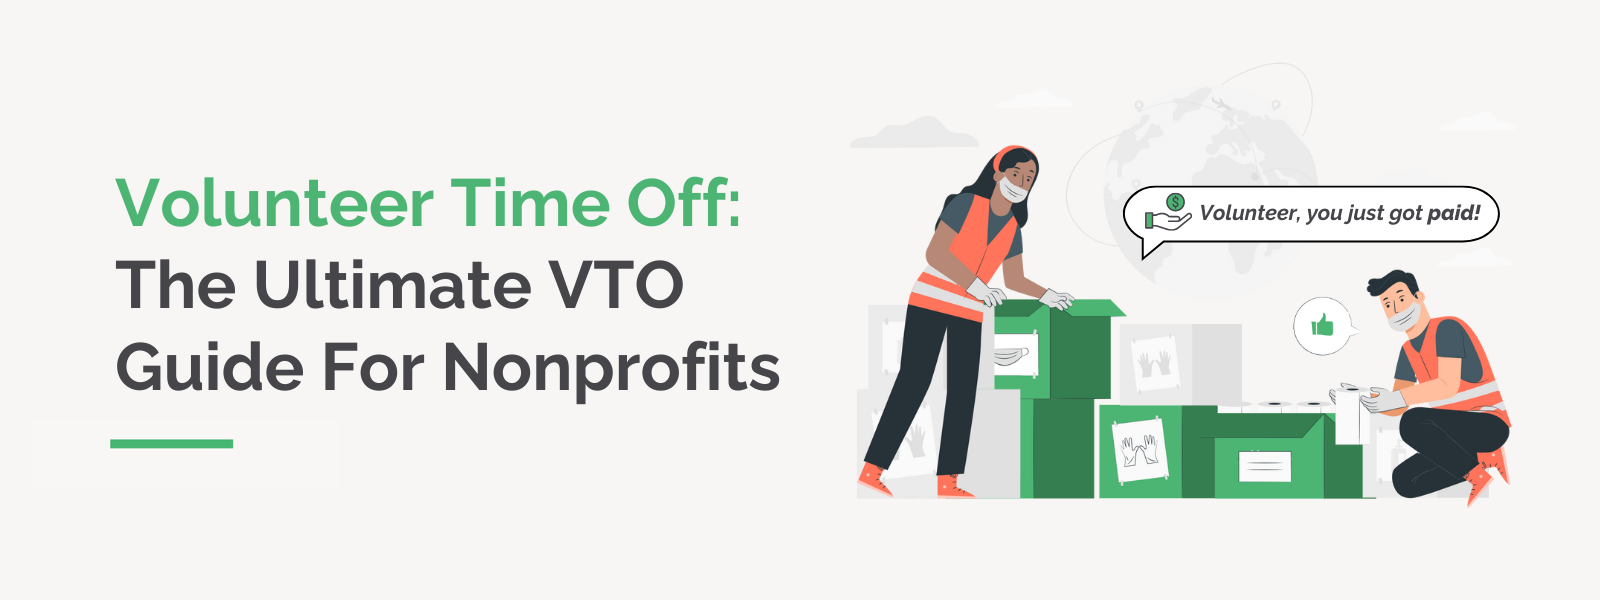 Volunteer Time Off The Ultimate VTO Guide For Nonprofits